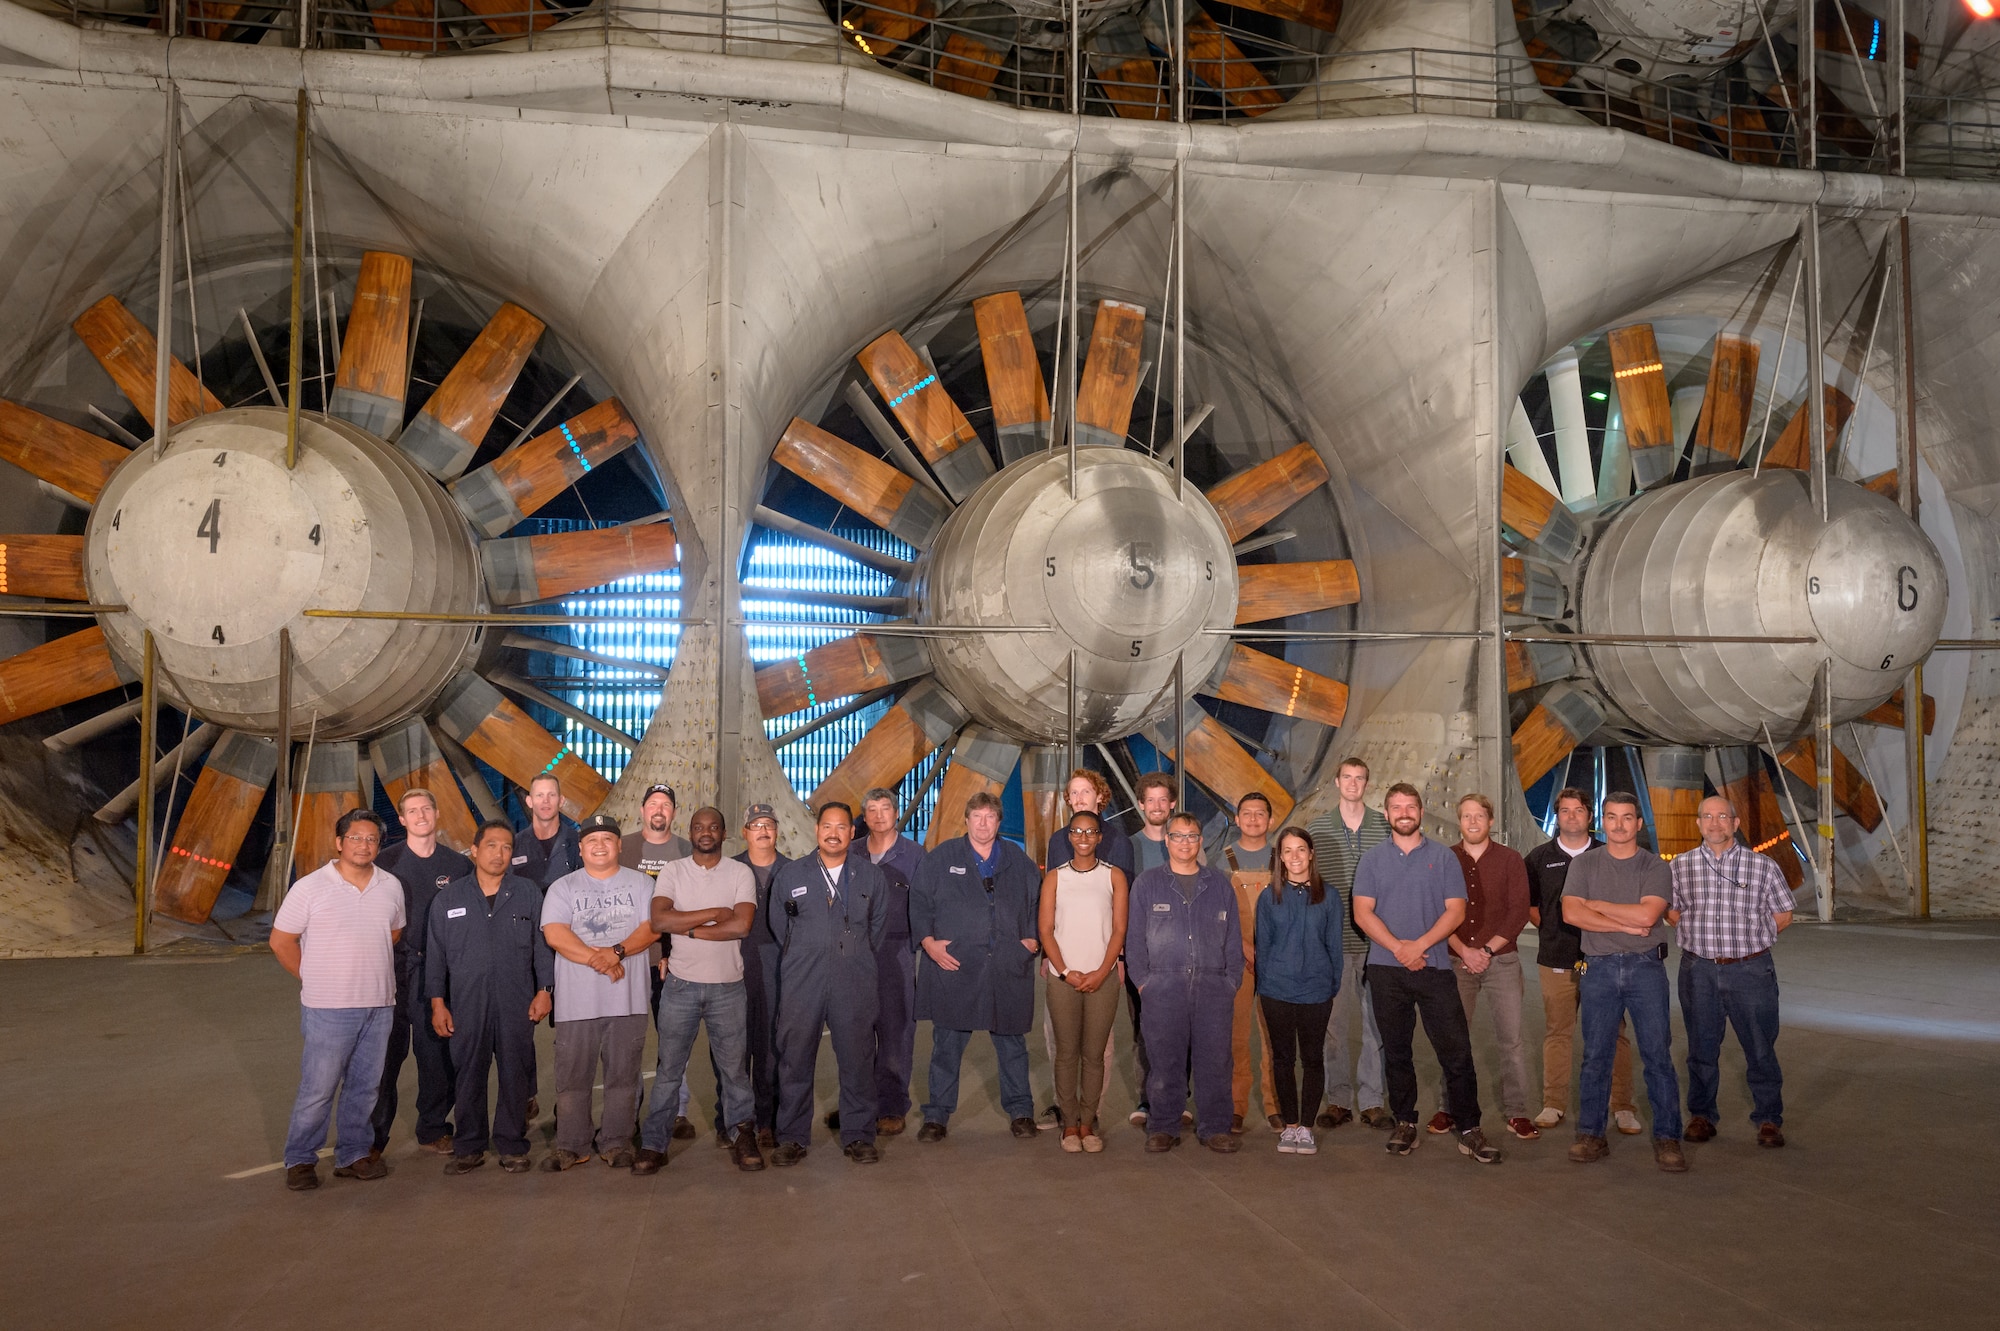 The Arnold Engineering Development Complex National Full-Scale Aerodynamics Complex (NFAC) return-to-service crew document their work on the 40- by 80-foot test section with a photo. In 2017, a collapsed wall panel at NFAC, located at Moffett Field in Mountain View, California, damaged one of the six large fan motors, pictured in the background, which powers the complex wind tunnels. NFAC craftsmen worked alongside engineers to successfully return the 40- by 80-foot test section to service in 2018. (U.S. Air Force photo)